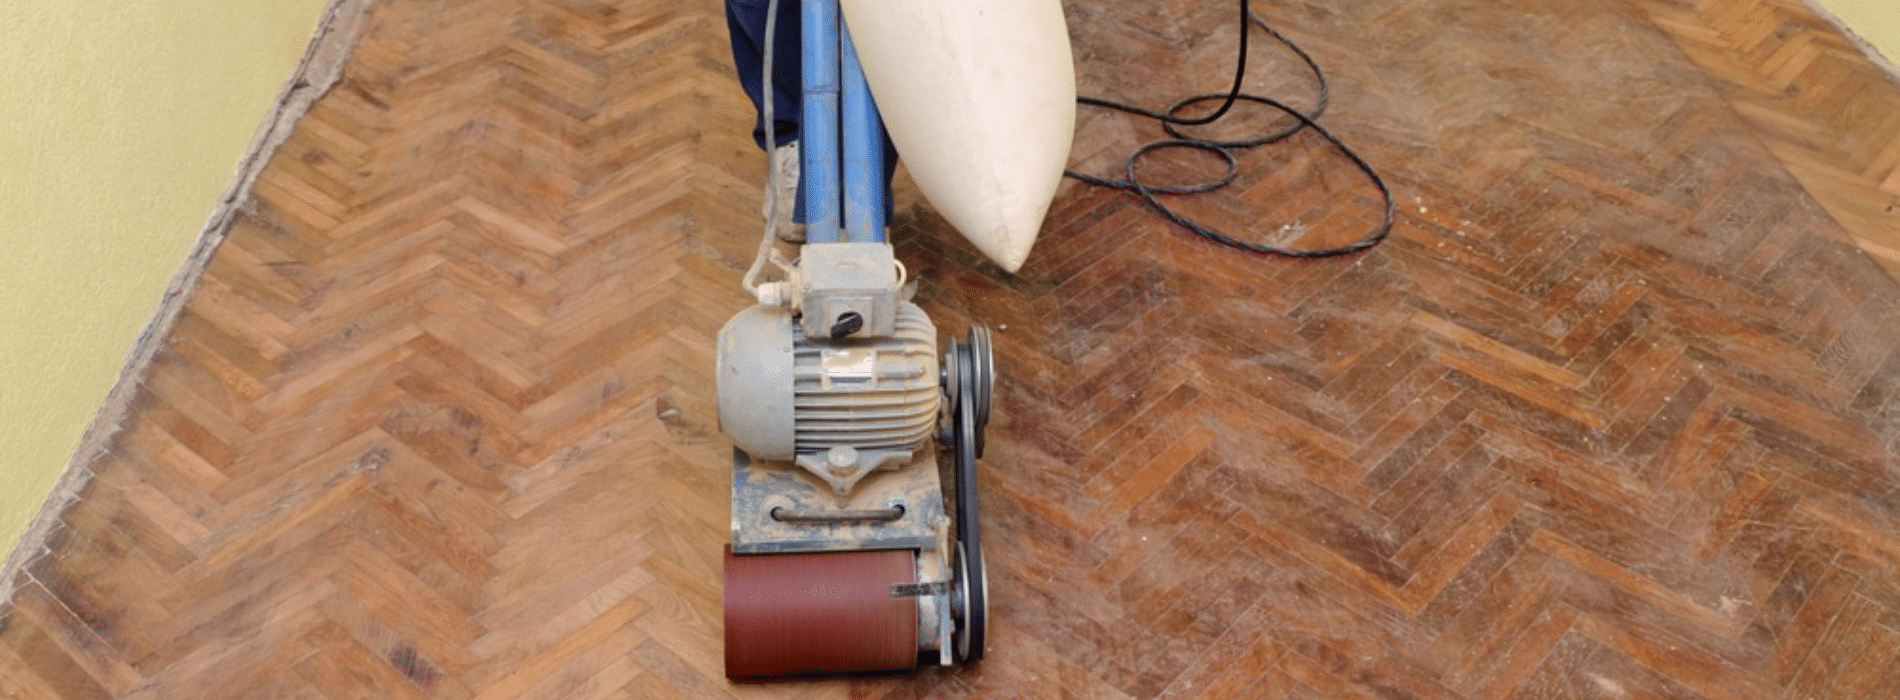 Mr Sander® in Selsdon, CR2, employing the powerful Bona Belt Effect sander (2.2 kW) for sanding herringbone floors. Operating at 230V and 50Hz/60Hz, this 250x750 mm sander, equipped with a dust extraction system and HEPA filter, guarantees a pristine and efficient outcome.